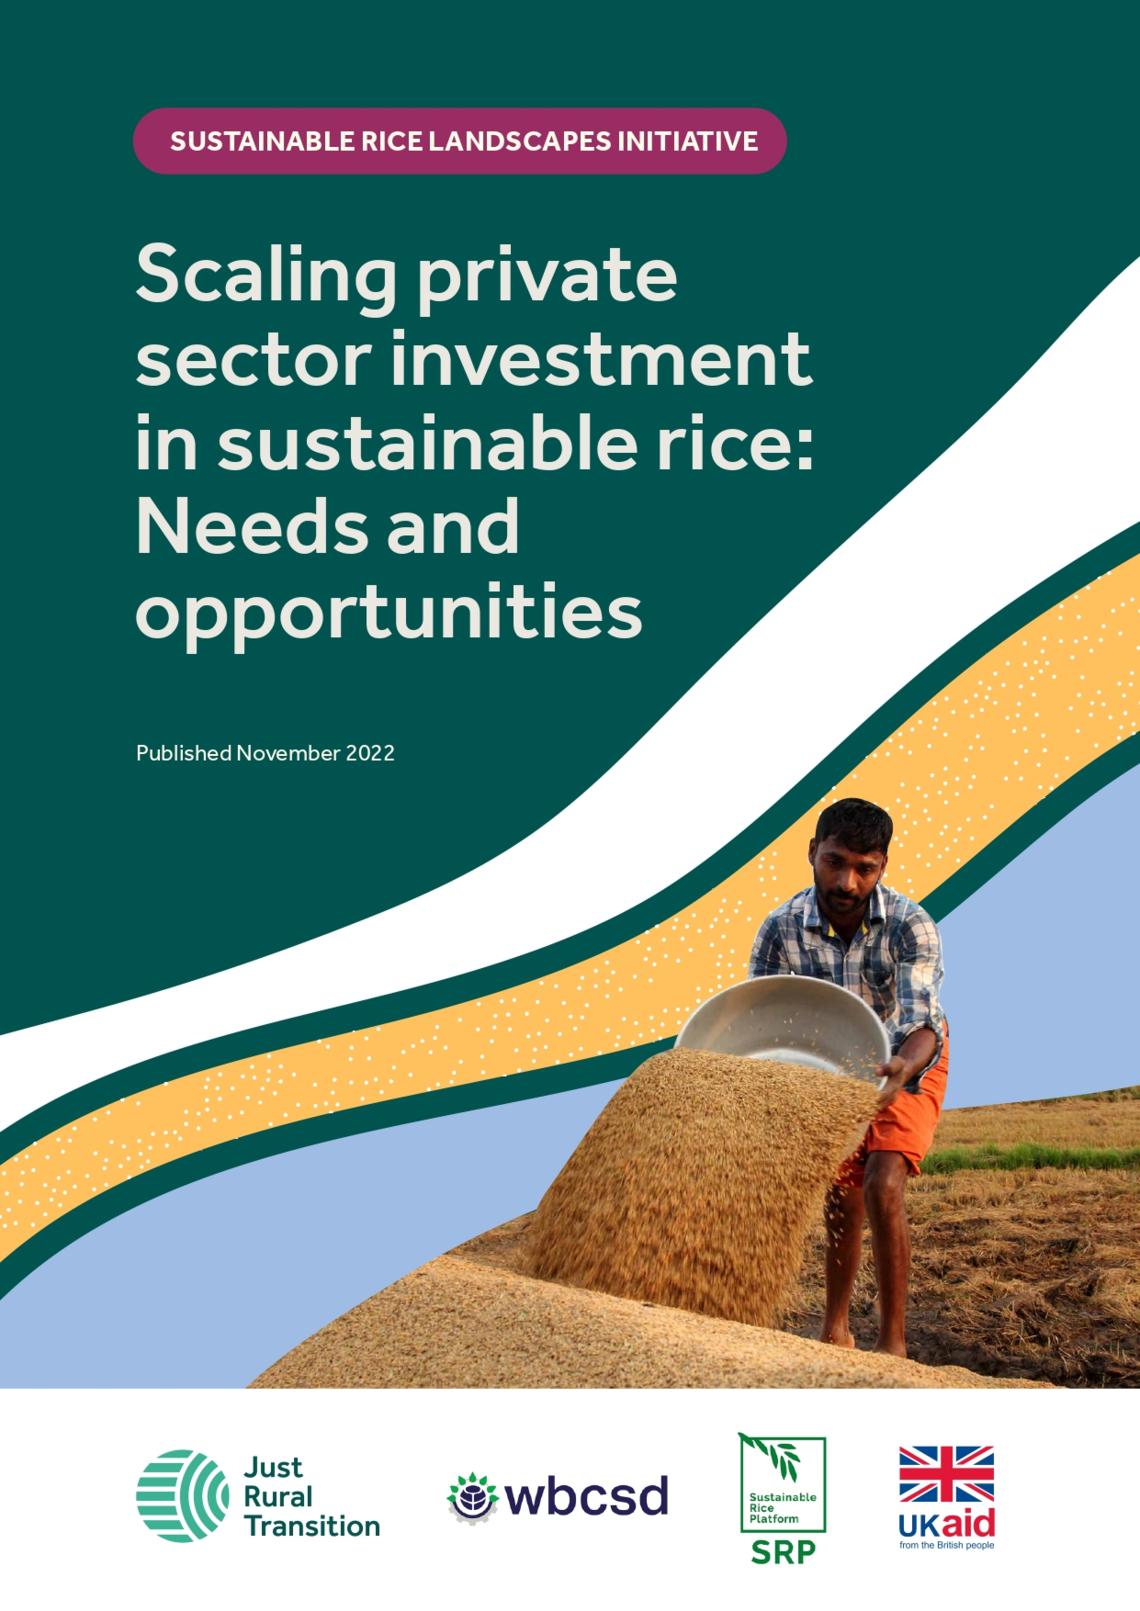 Sustainable Rice Landscapes Initiative - Scaling private sector investment in sustainable rice: Needs and opportunities 